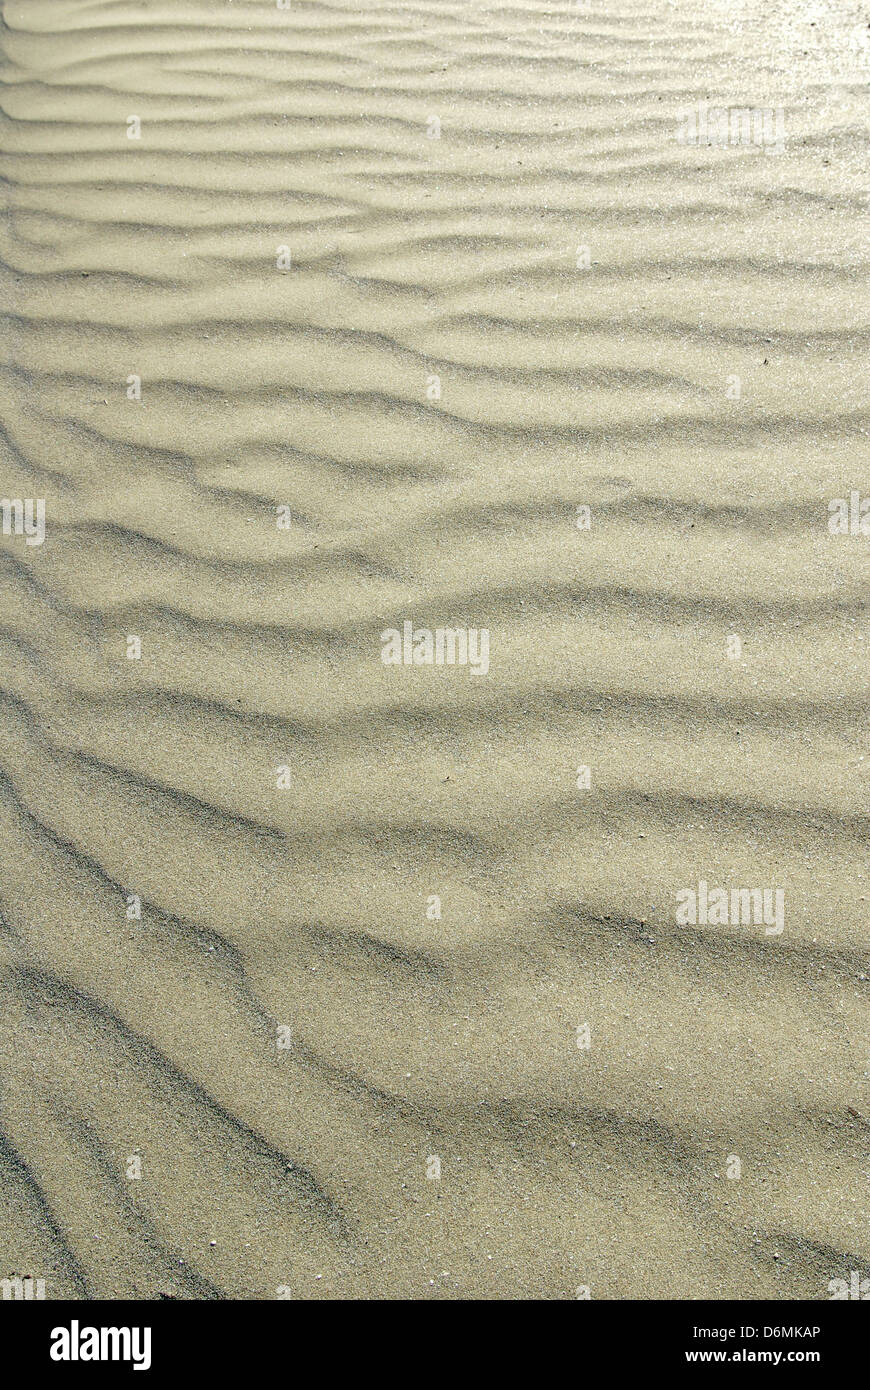 sand ripples in the dawn light; suggesting relax and meditation Stock Photo